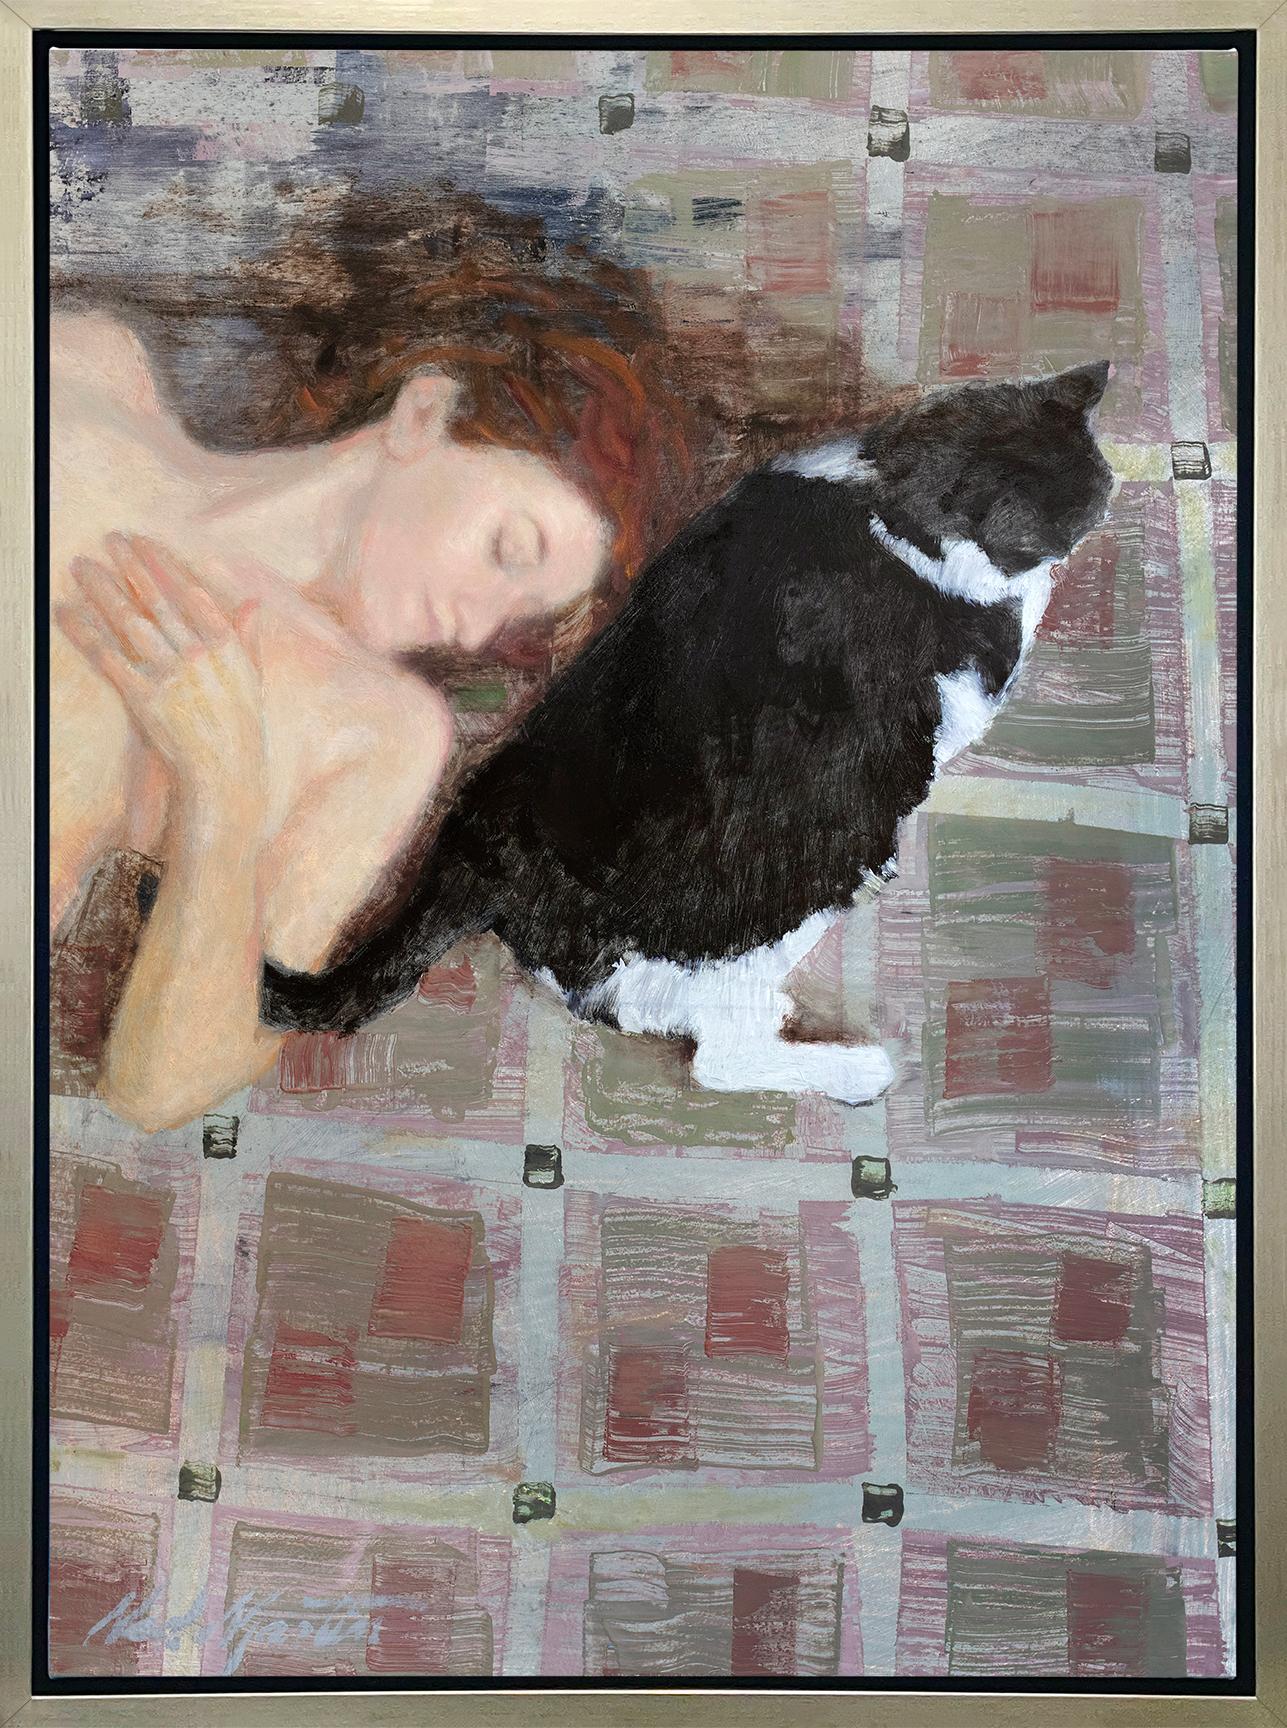 Ned Martin Figurative Print - "Lazy Day, " Framed Limited Edition Giclee Print, 48" x 36"